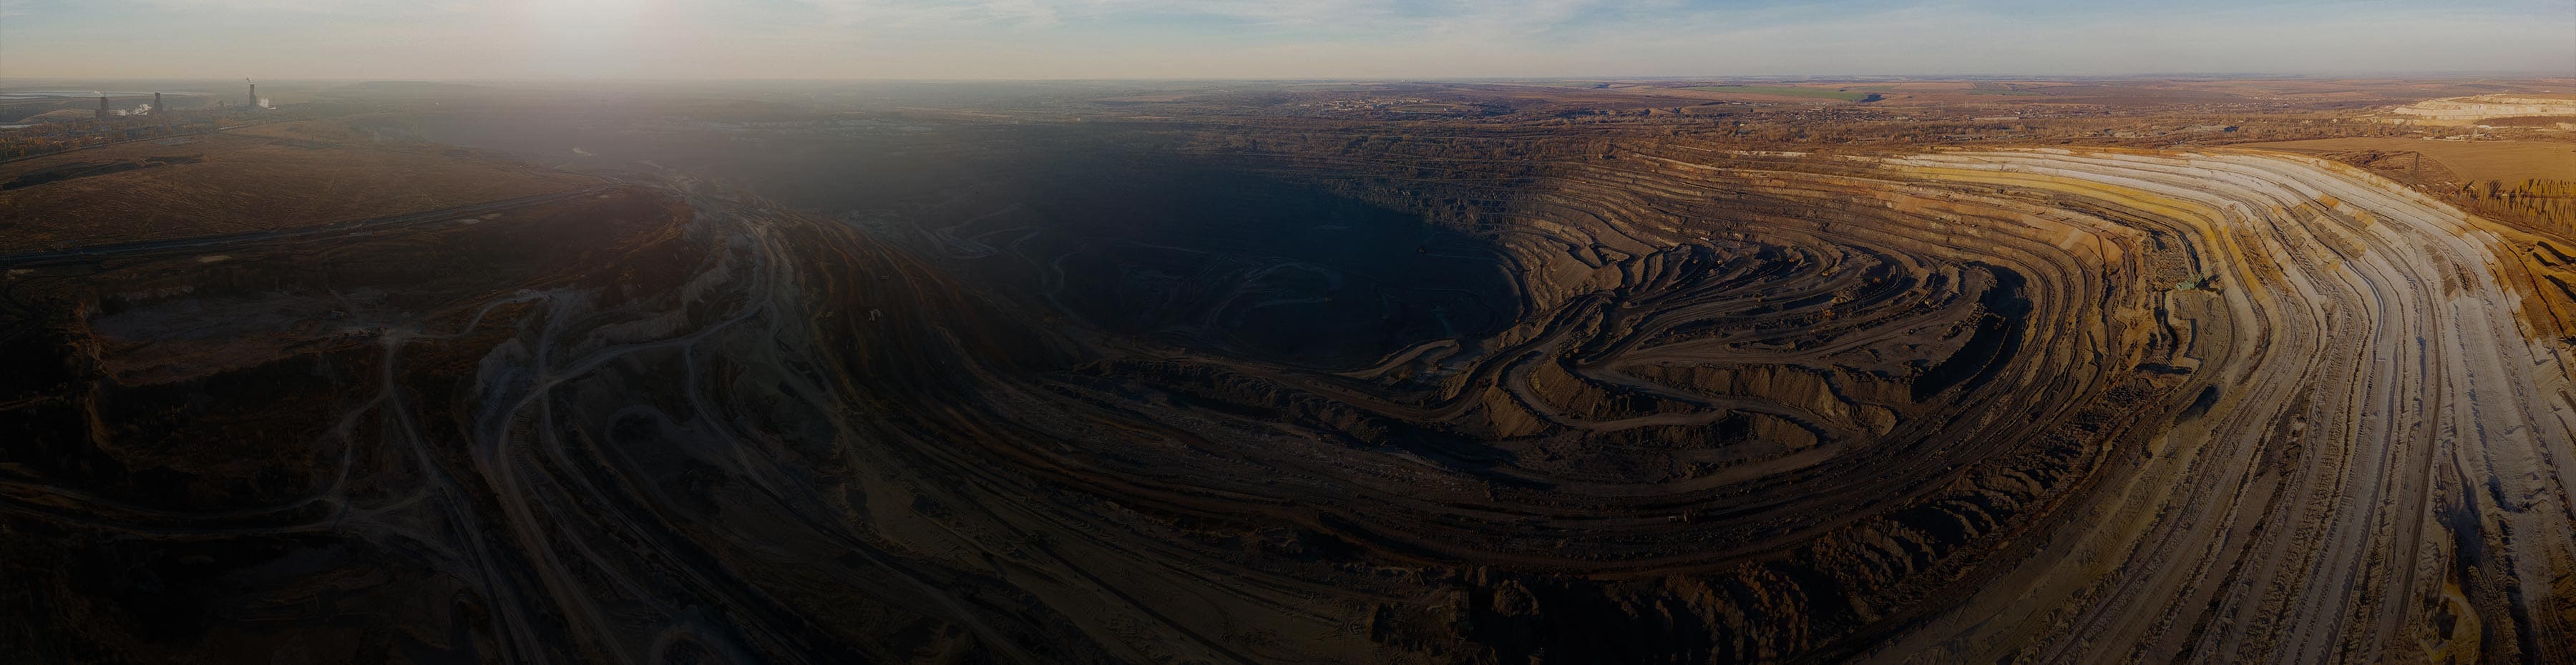 Enabling mining and resources to realise the mine of the future